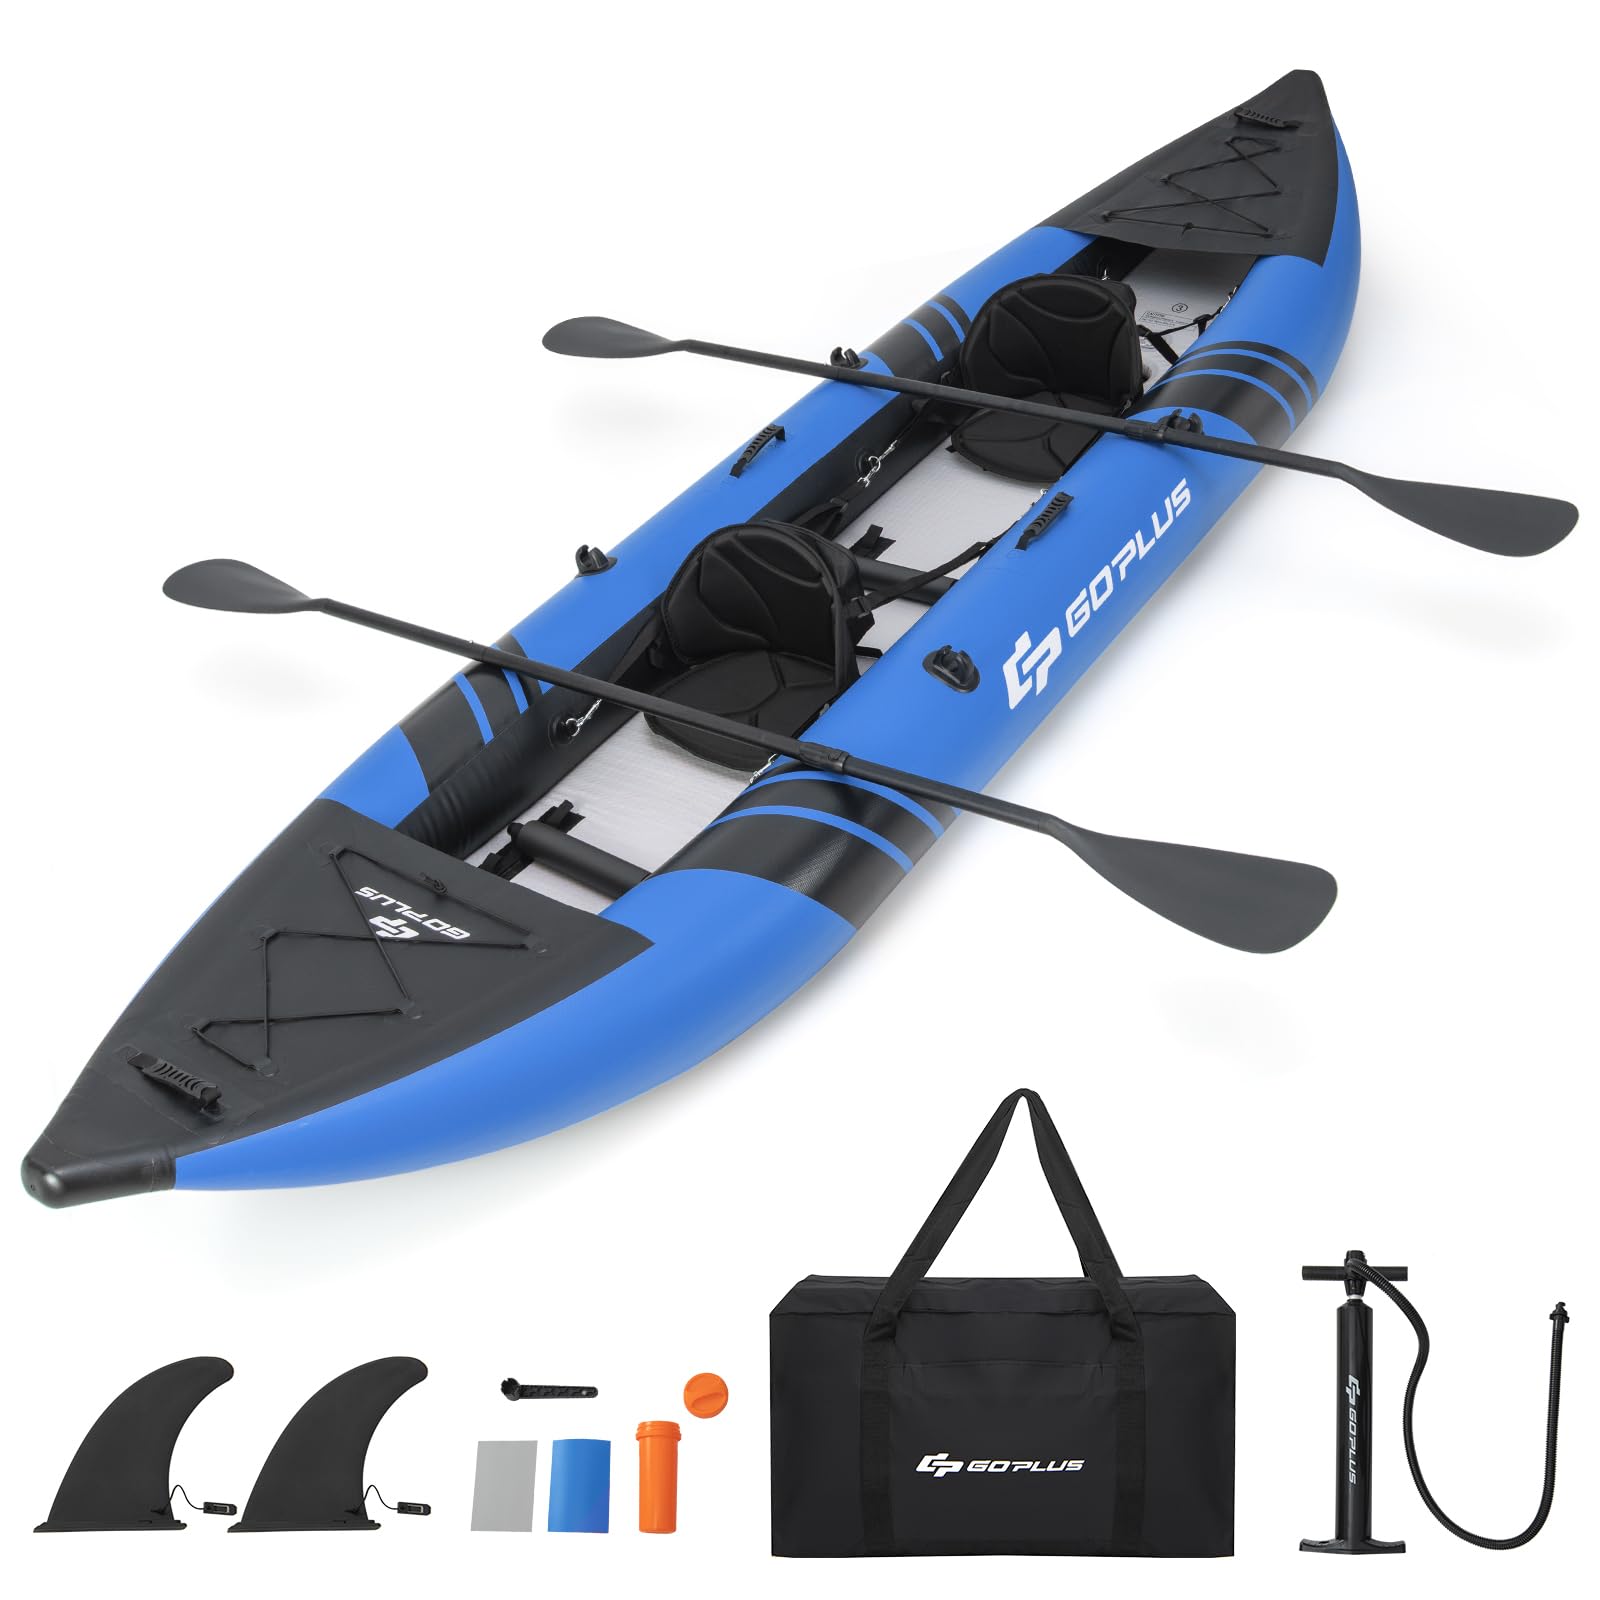 Goplus Inflatable Kayak, 2-Person Kayak Set for Adults with 507 lbs Weight Capacity, Blue